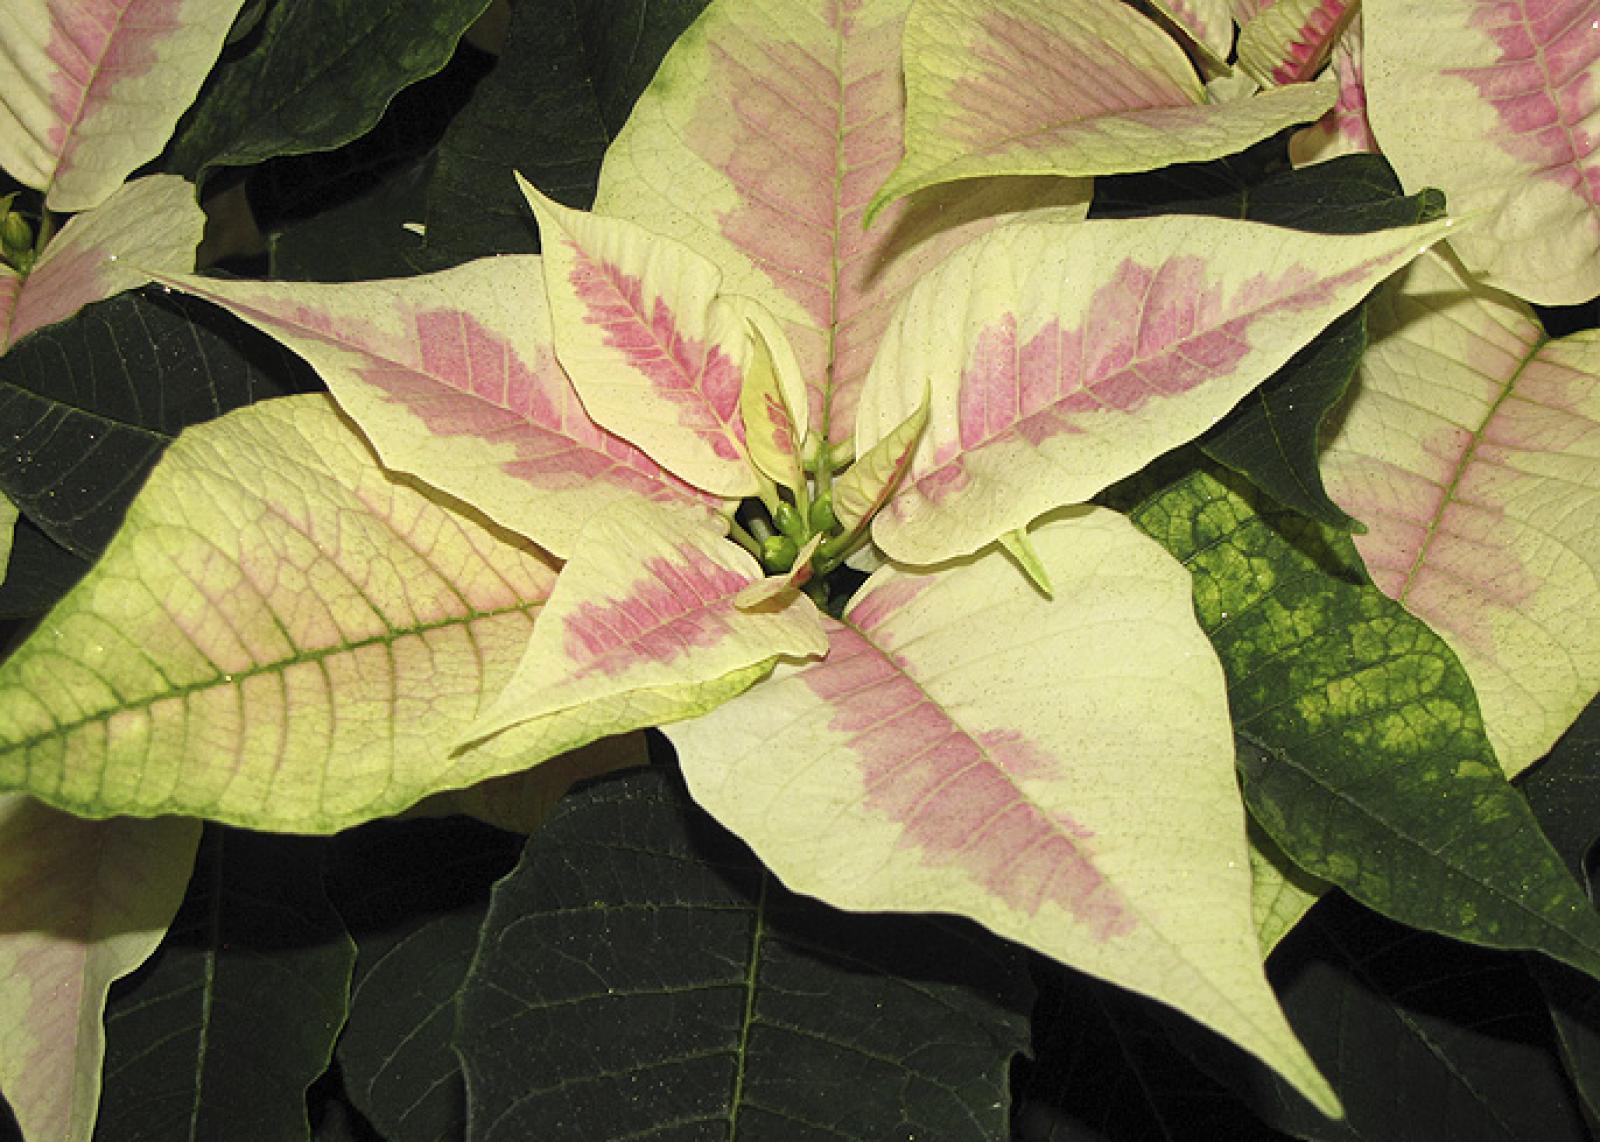 Home care tips for your poinsettia